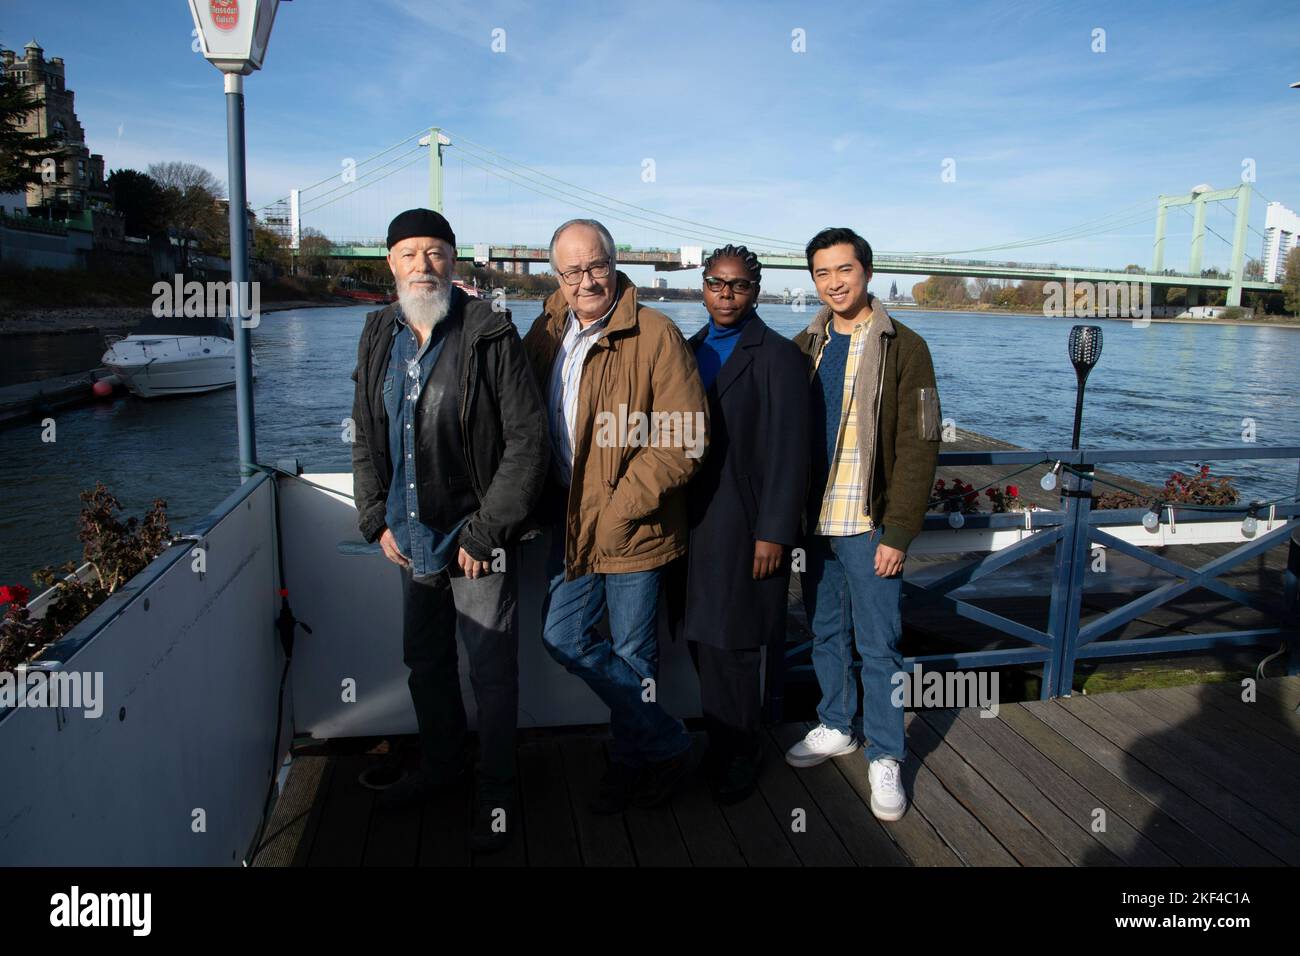 Cologne, Deutschland. 15th Nov, 2022. From left: actor Bill MOCKRIDGE plays the role of Reinhard Bielefelder, actor Hartmut VOLLE plays the role of Klaus Schwithz, actress Dela DABULAMANZI plays the role of Dr. Lara Krueger, actor Aaron LE plays the role of Hui Ko, shooting for 12 new episodes 'Die Rentnercops', Cologne, November 15, 2022. Credit: dpa/Alamy Live News Stock Photo